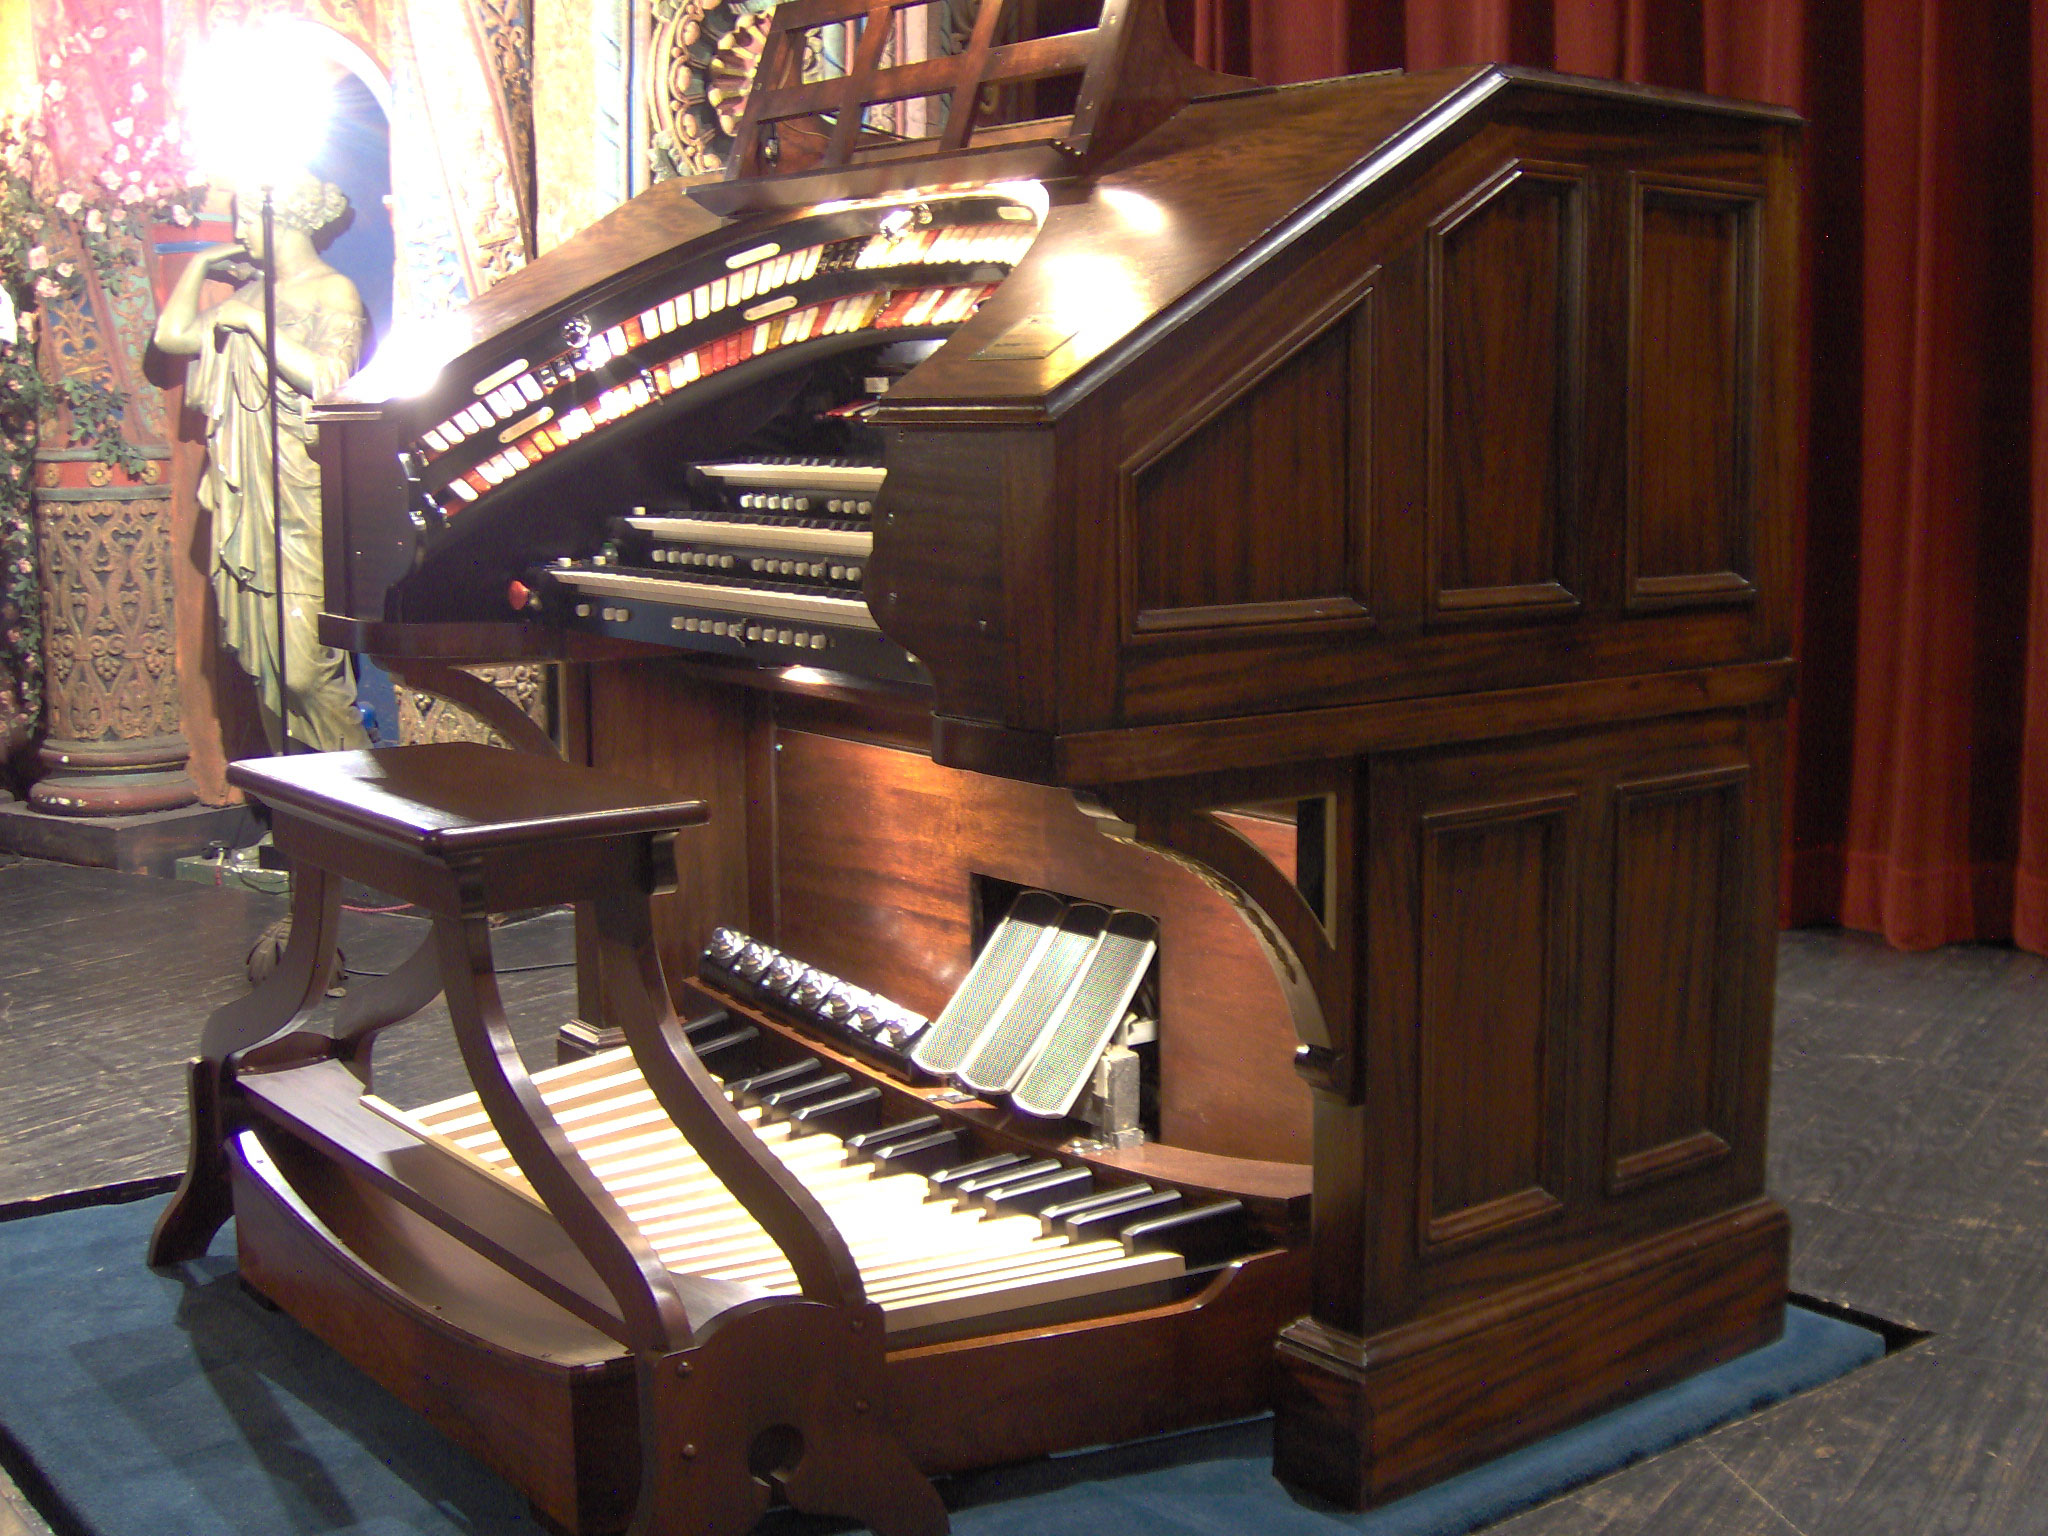 Click here to download a 2048 x 1536 JPG image of the Tampa Theatre's 3/14 Mighty WurliTzer Theatre Pipe Organ that Johnnie June Carterloves to play.